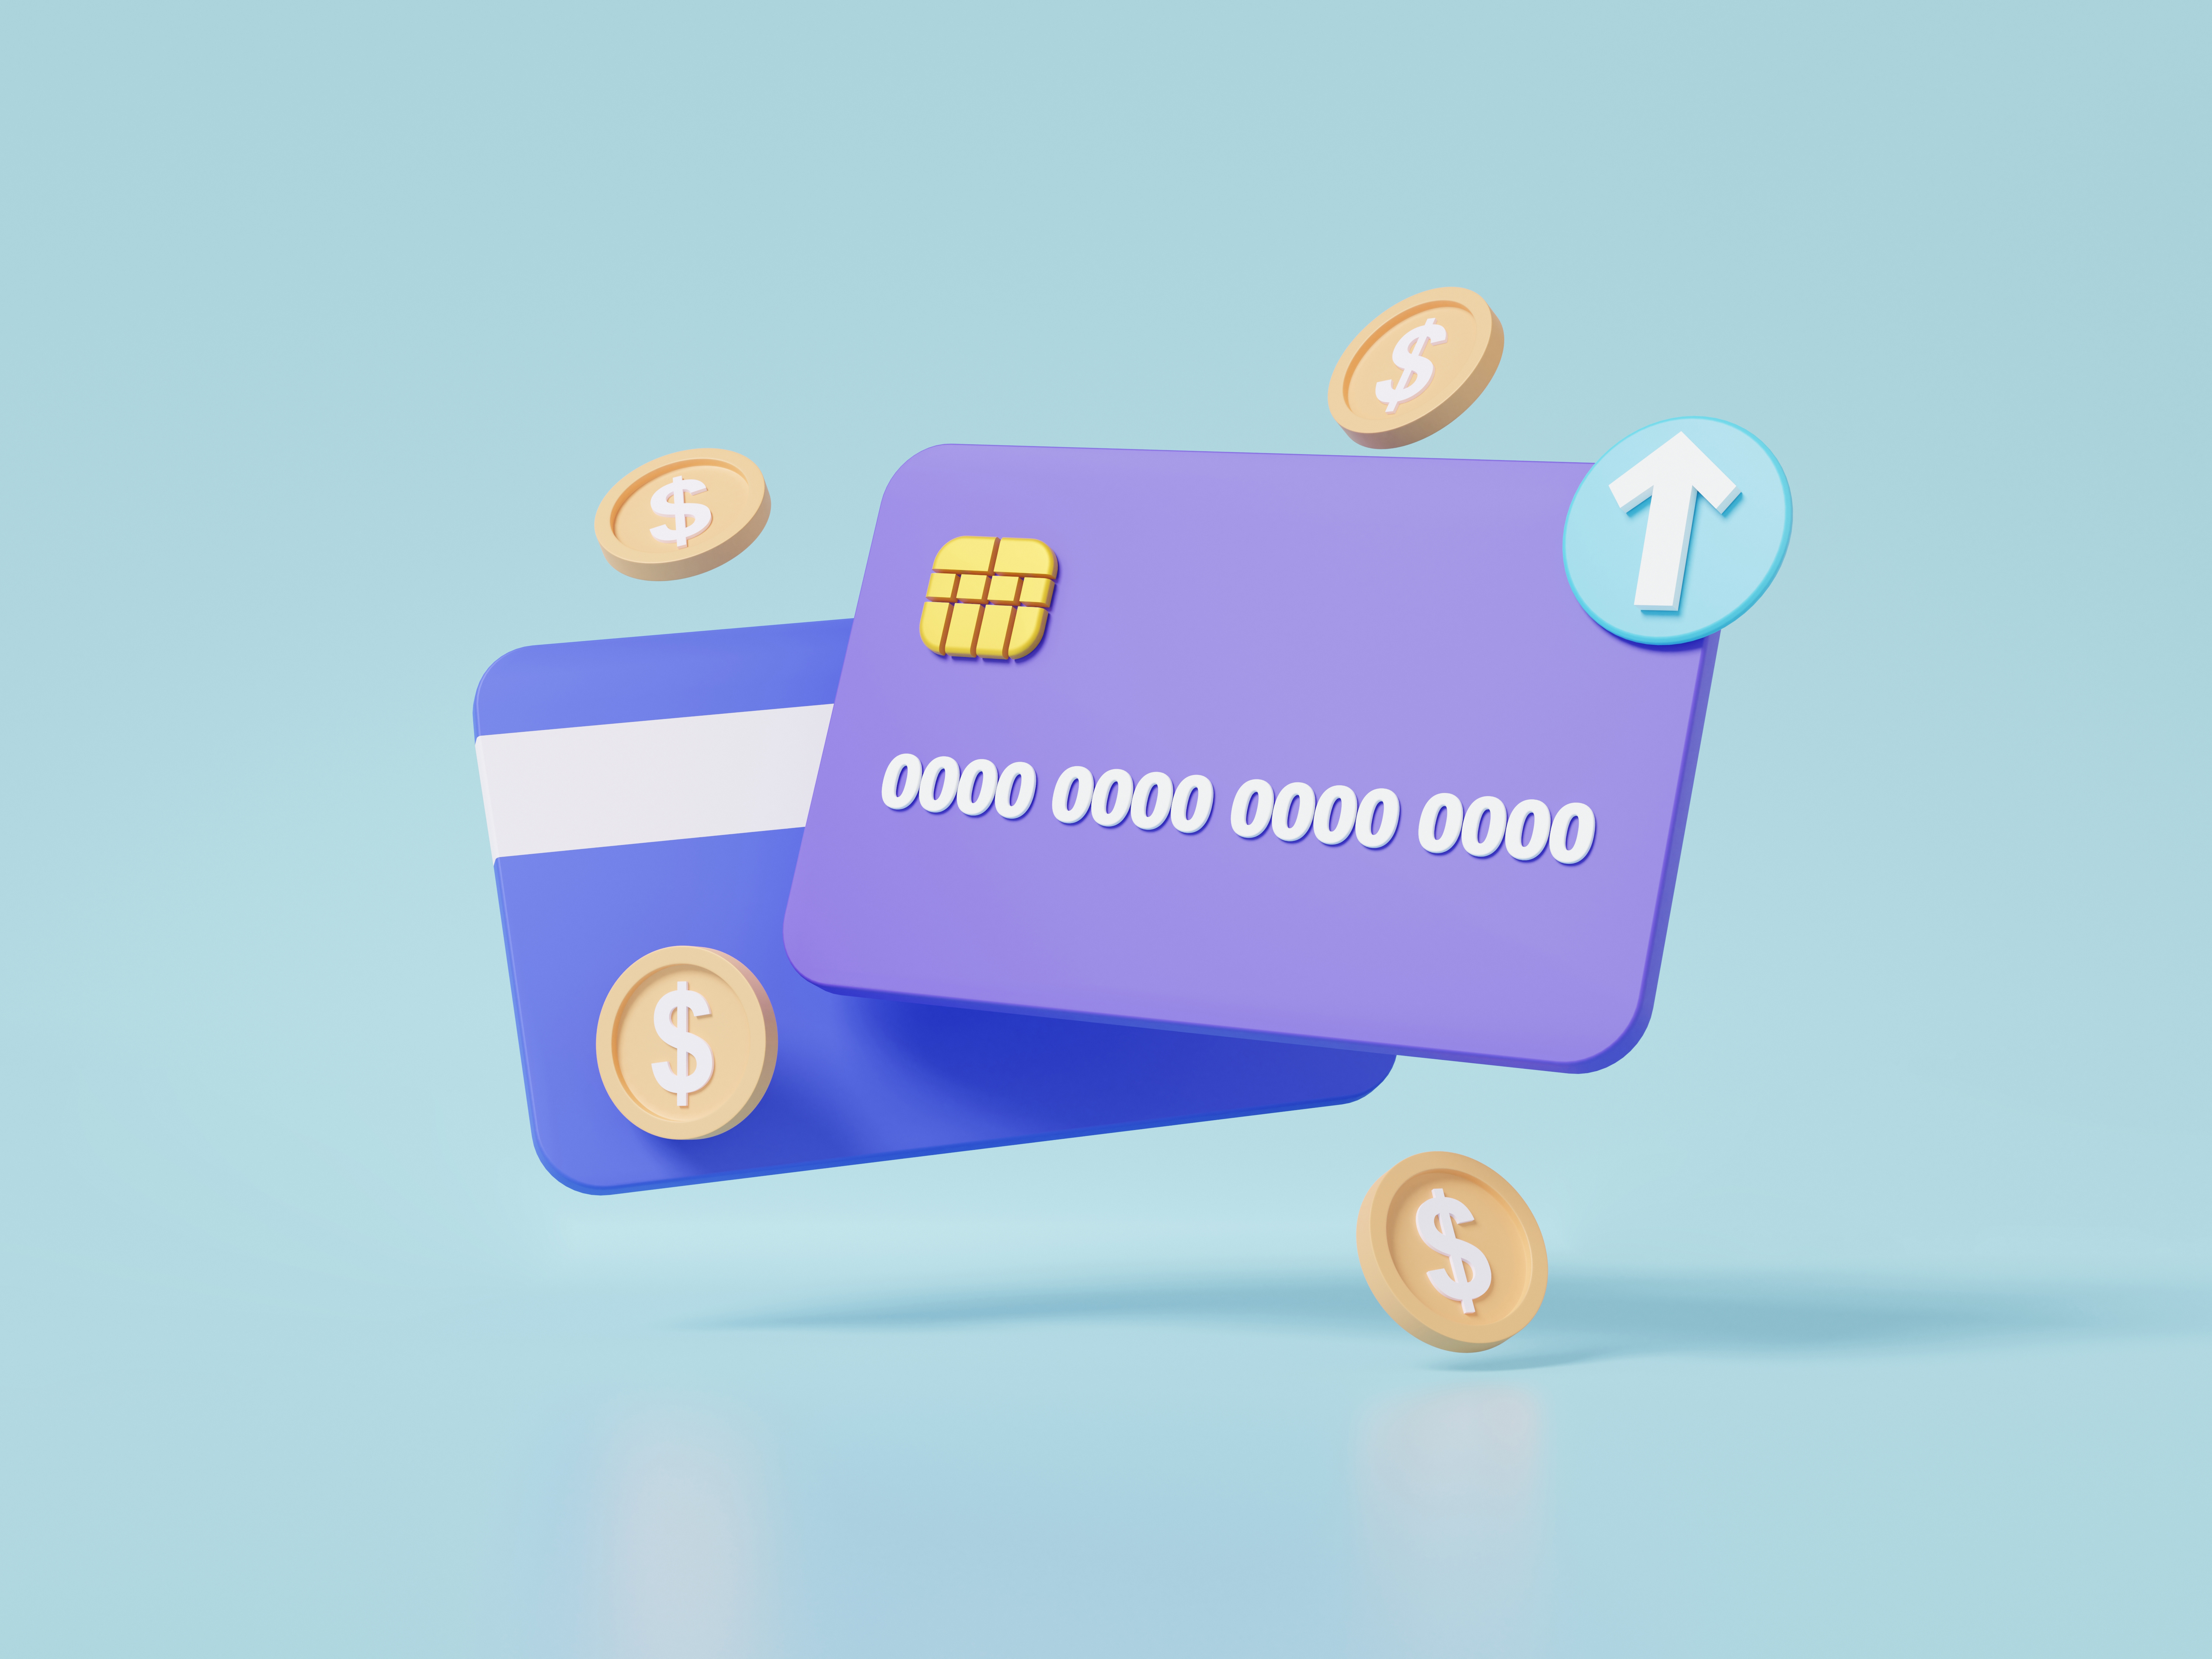 3D arrow growth credit or debit card concept with coins buy sell  online payments money transfer Financial transactions. grow dollar currency exchange. minimal cartoon. 3d rendering illustration